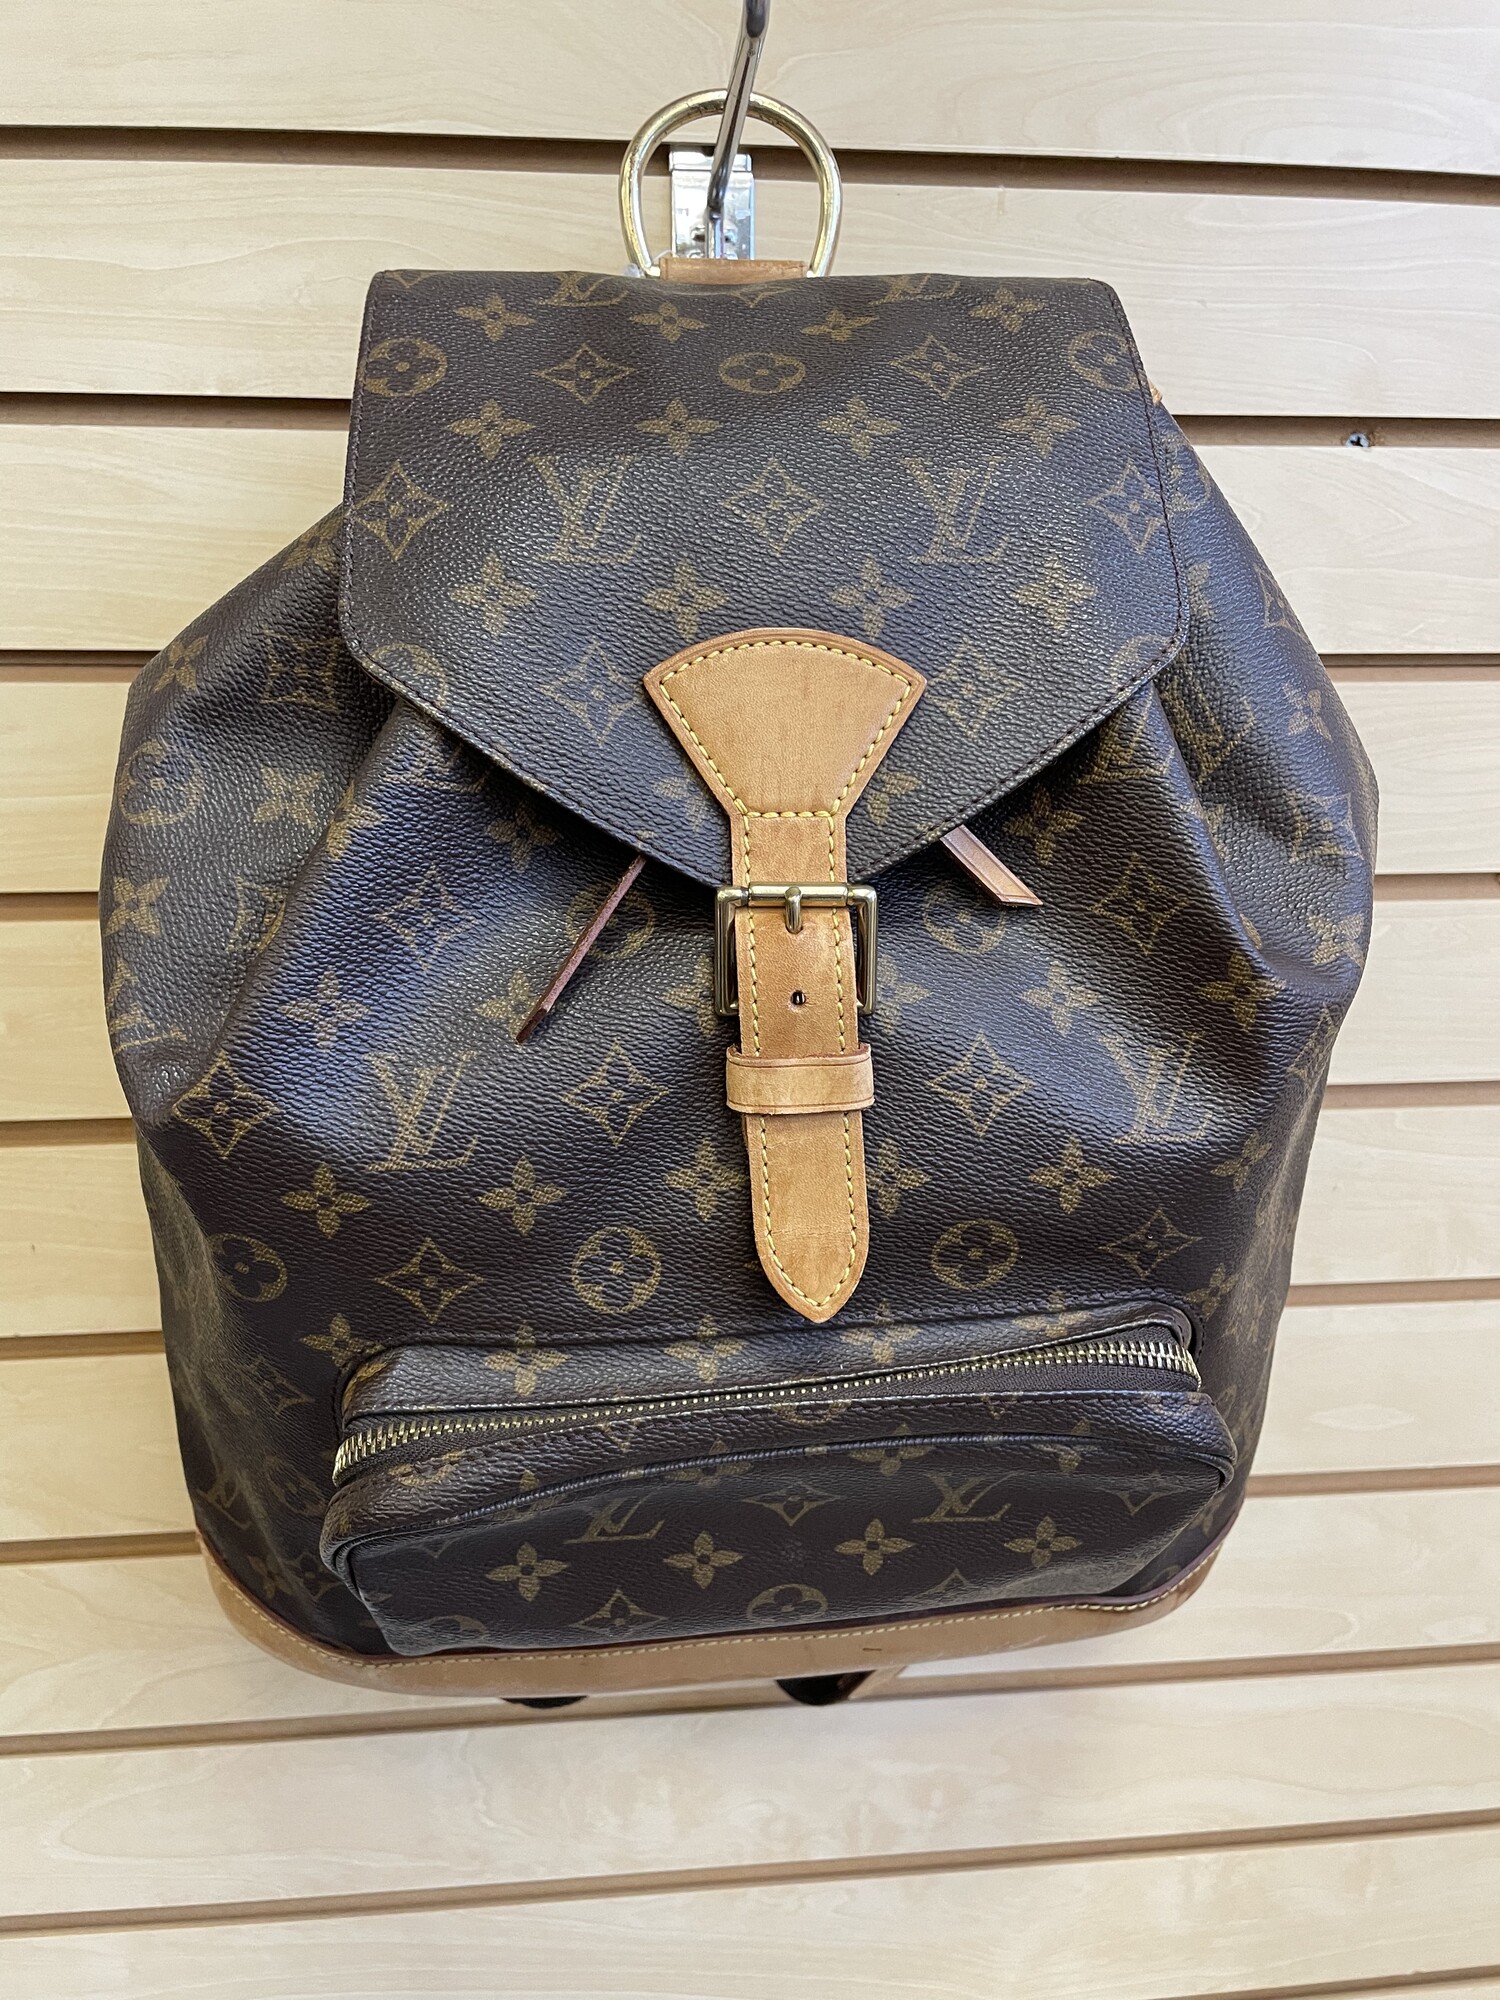 Louis Vuitton Canvas Montsouris Backpack As Is, Brown LV Logo Coated Canvas with Brown Canvas Lining, Fabric and Leather Straps, Leather Bottom with Water Stains and Cracks Along the Bottom and Sides, Leather Drawstring Opening (Some Wear, Cracking, and Water Stains on Piping) and Leather Piping and a Flap Cover (Stains on Fabric Under the Flap) with Leather Buckle Closure (Water Stains on Leather), Inside Pocket with Leather Opening, Gold Hardware with Some Tarnishing/Scraches

Size: Length: 12.2 inches, Heighth: 15.4 inches, Depth: 5.1 inches